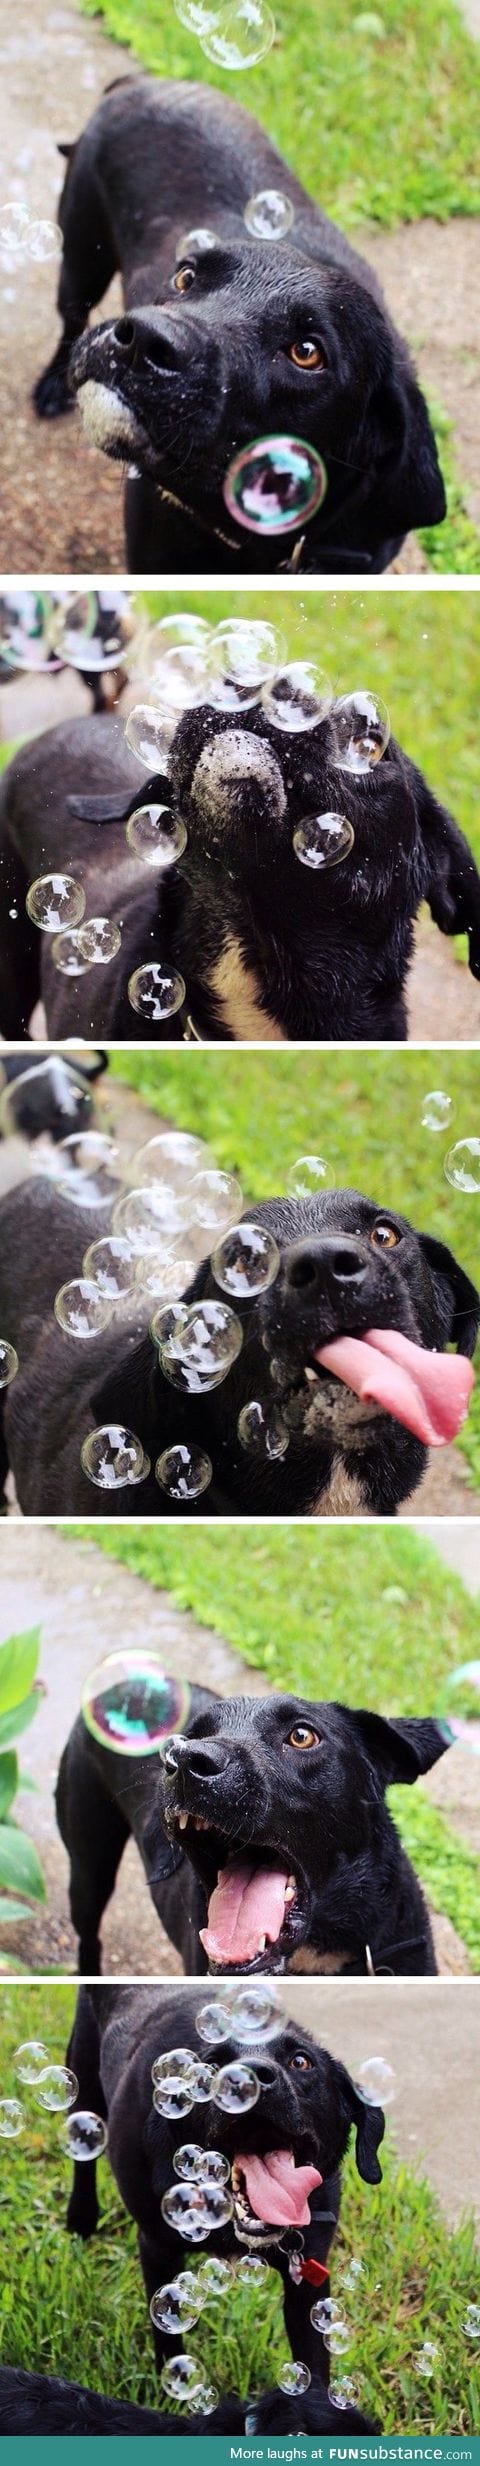 Dogs first time seeing Bubbles